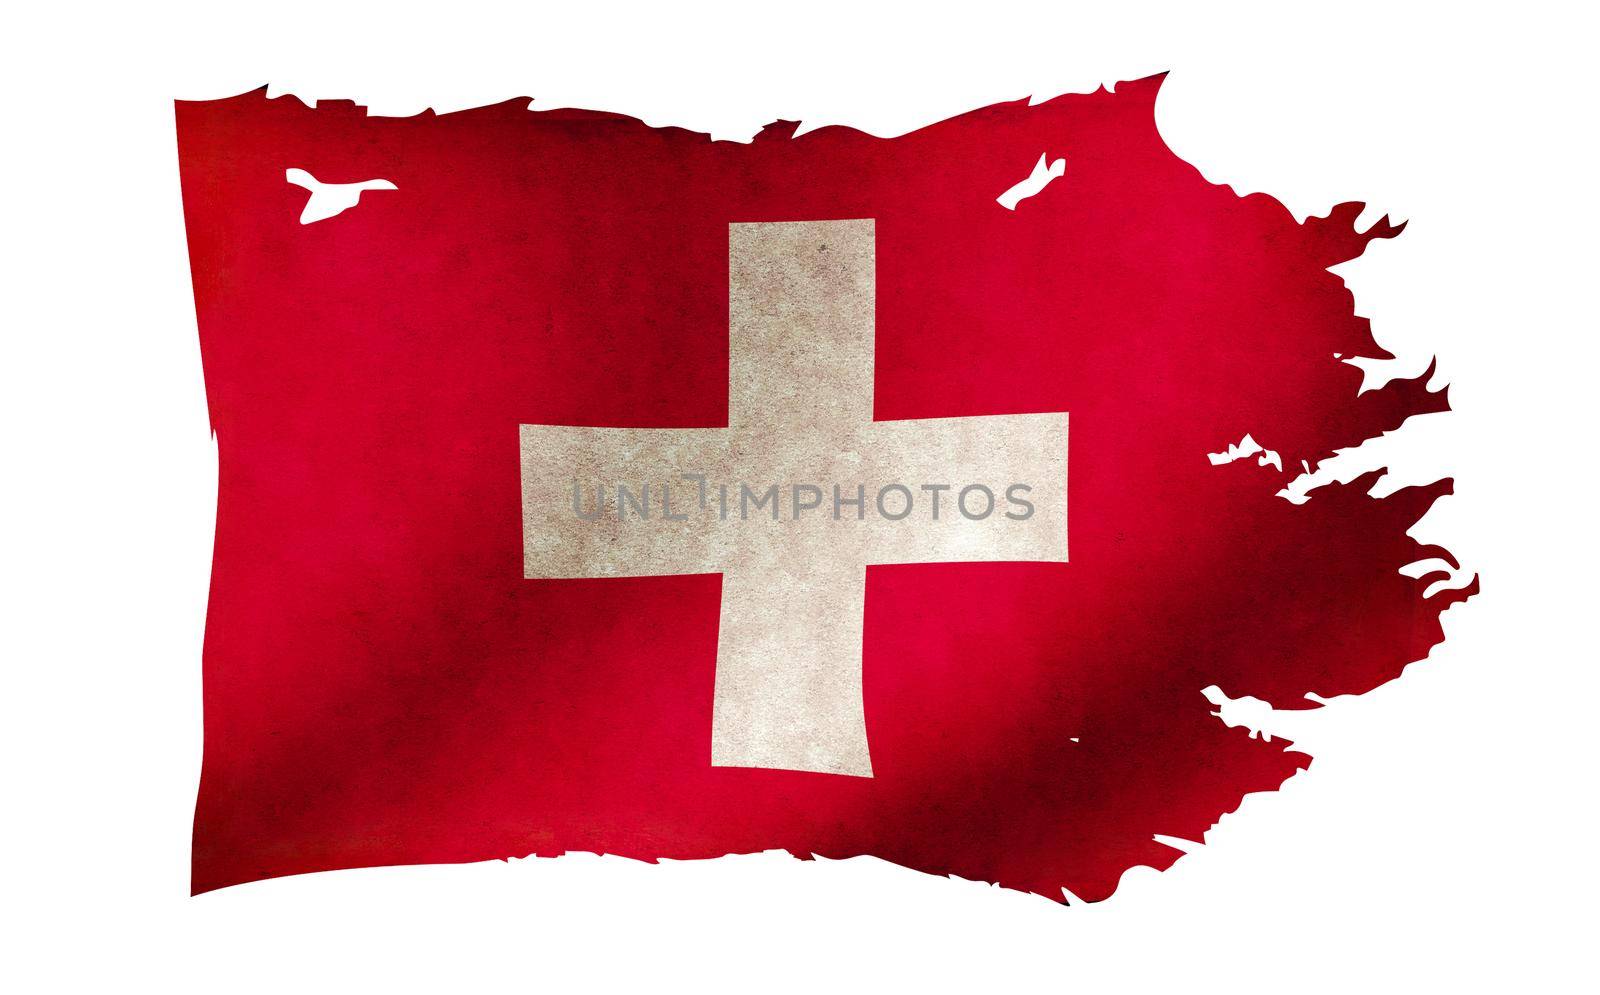 Dirty and torn country flag illustration / Switzerland by barks